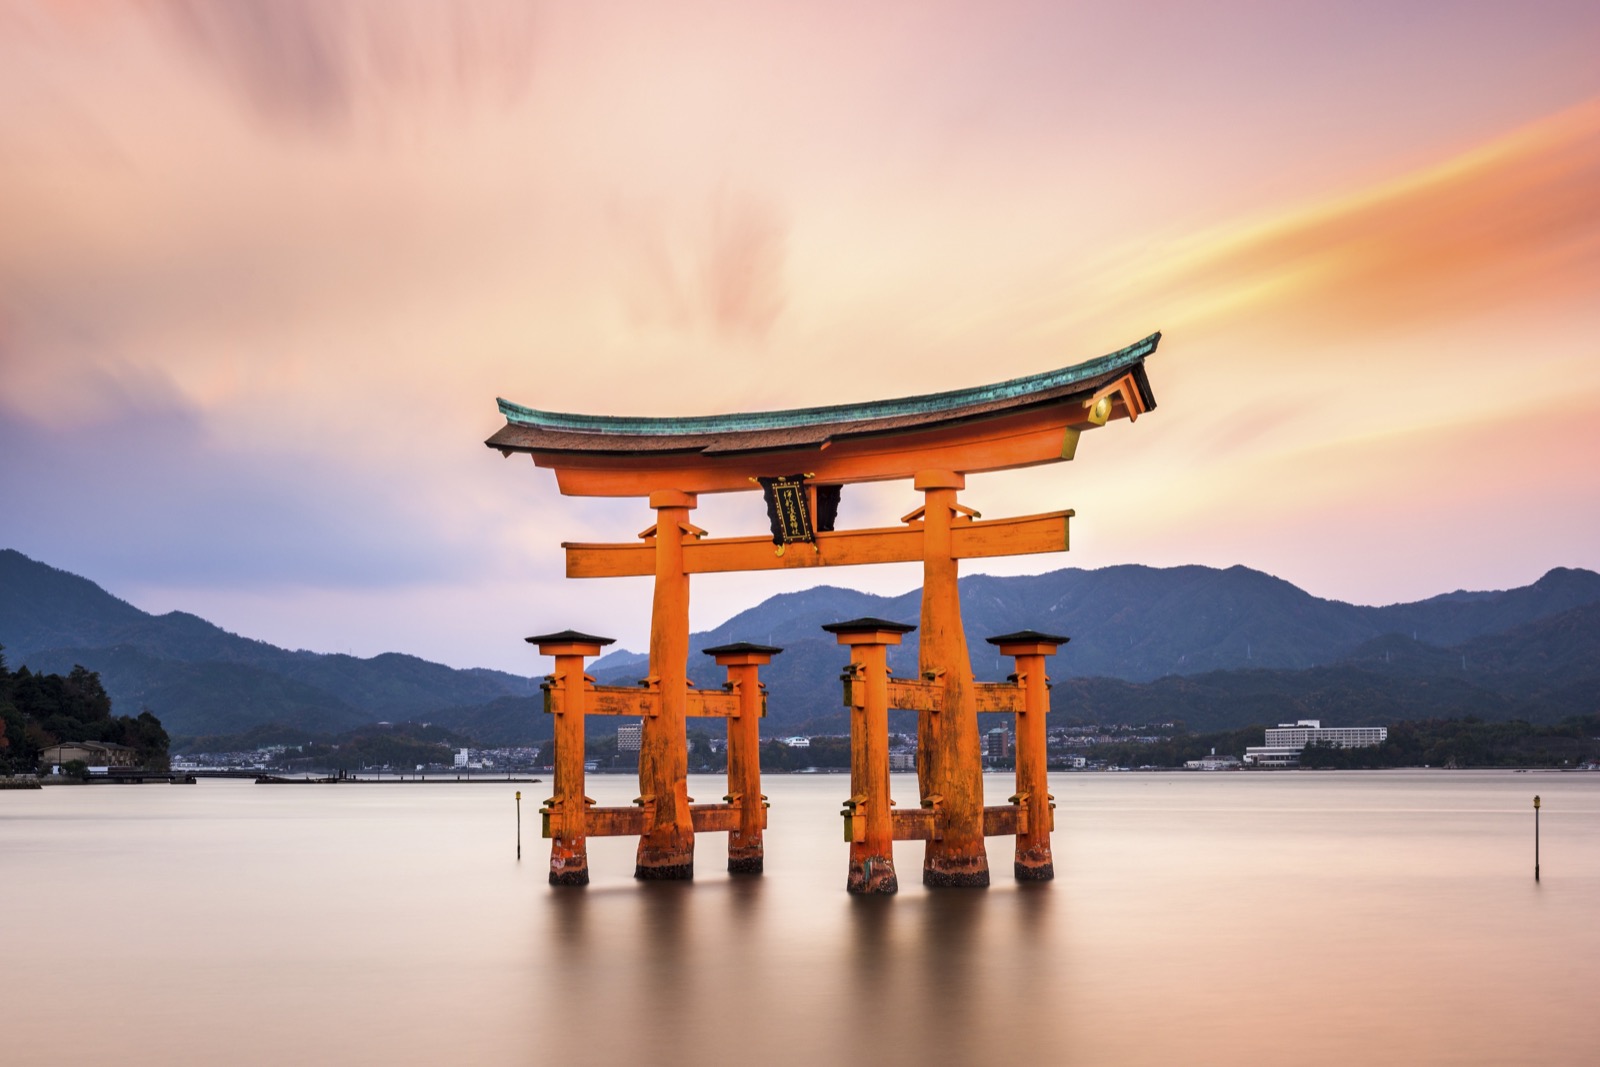 Can You Pass This 40-Question Geography Test That Gets Progressively Harder With Each Question? Itsukushima Shrine, Hiroshima, Japan Shintoism